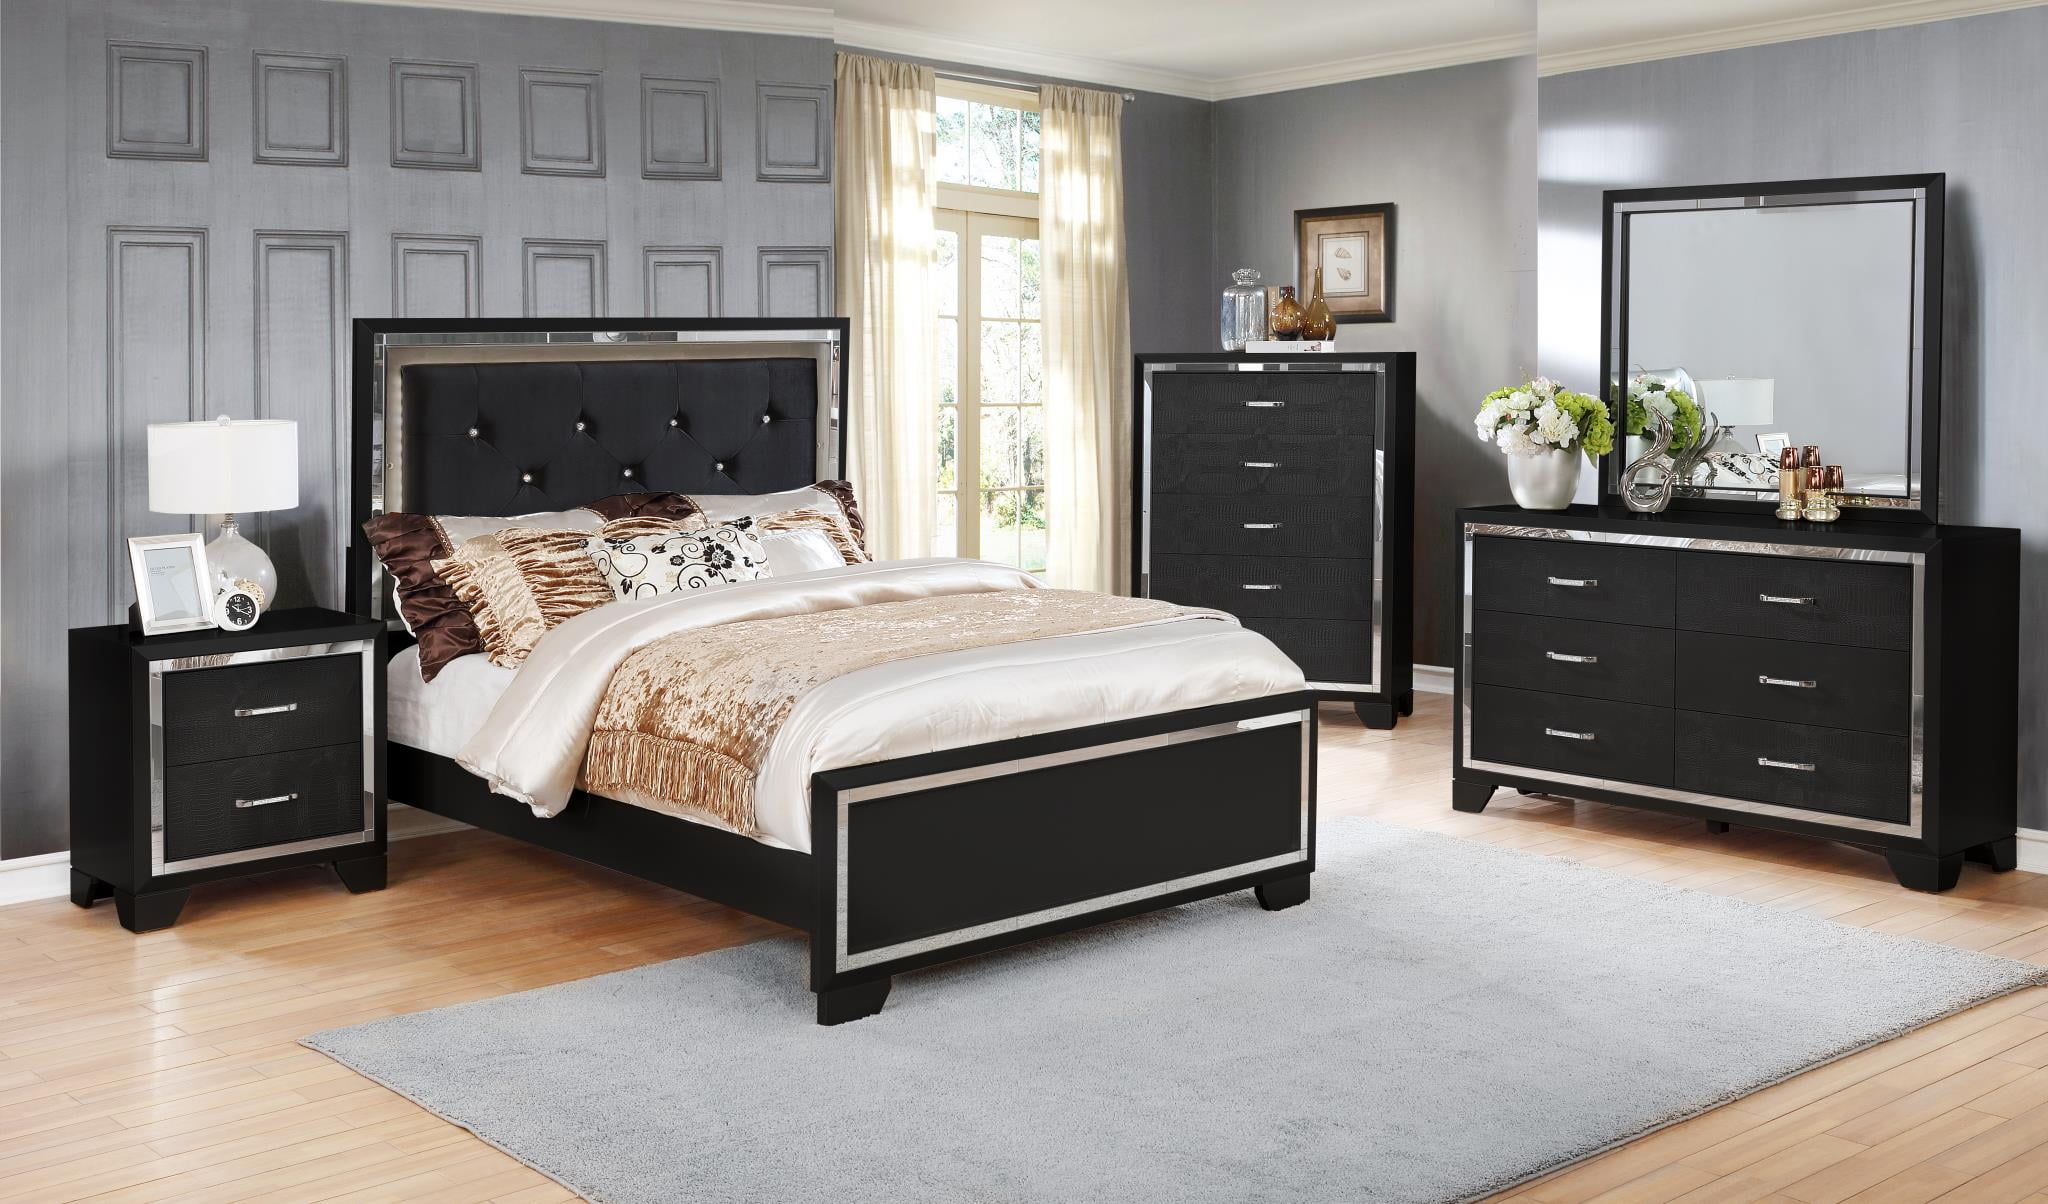 Gtu Furniture Contemporary Black And, Queen Bed Set Silver